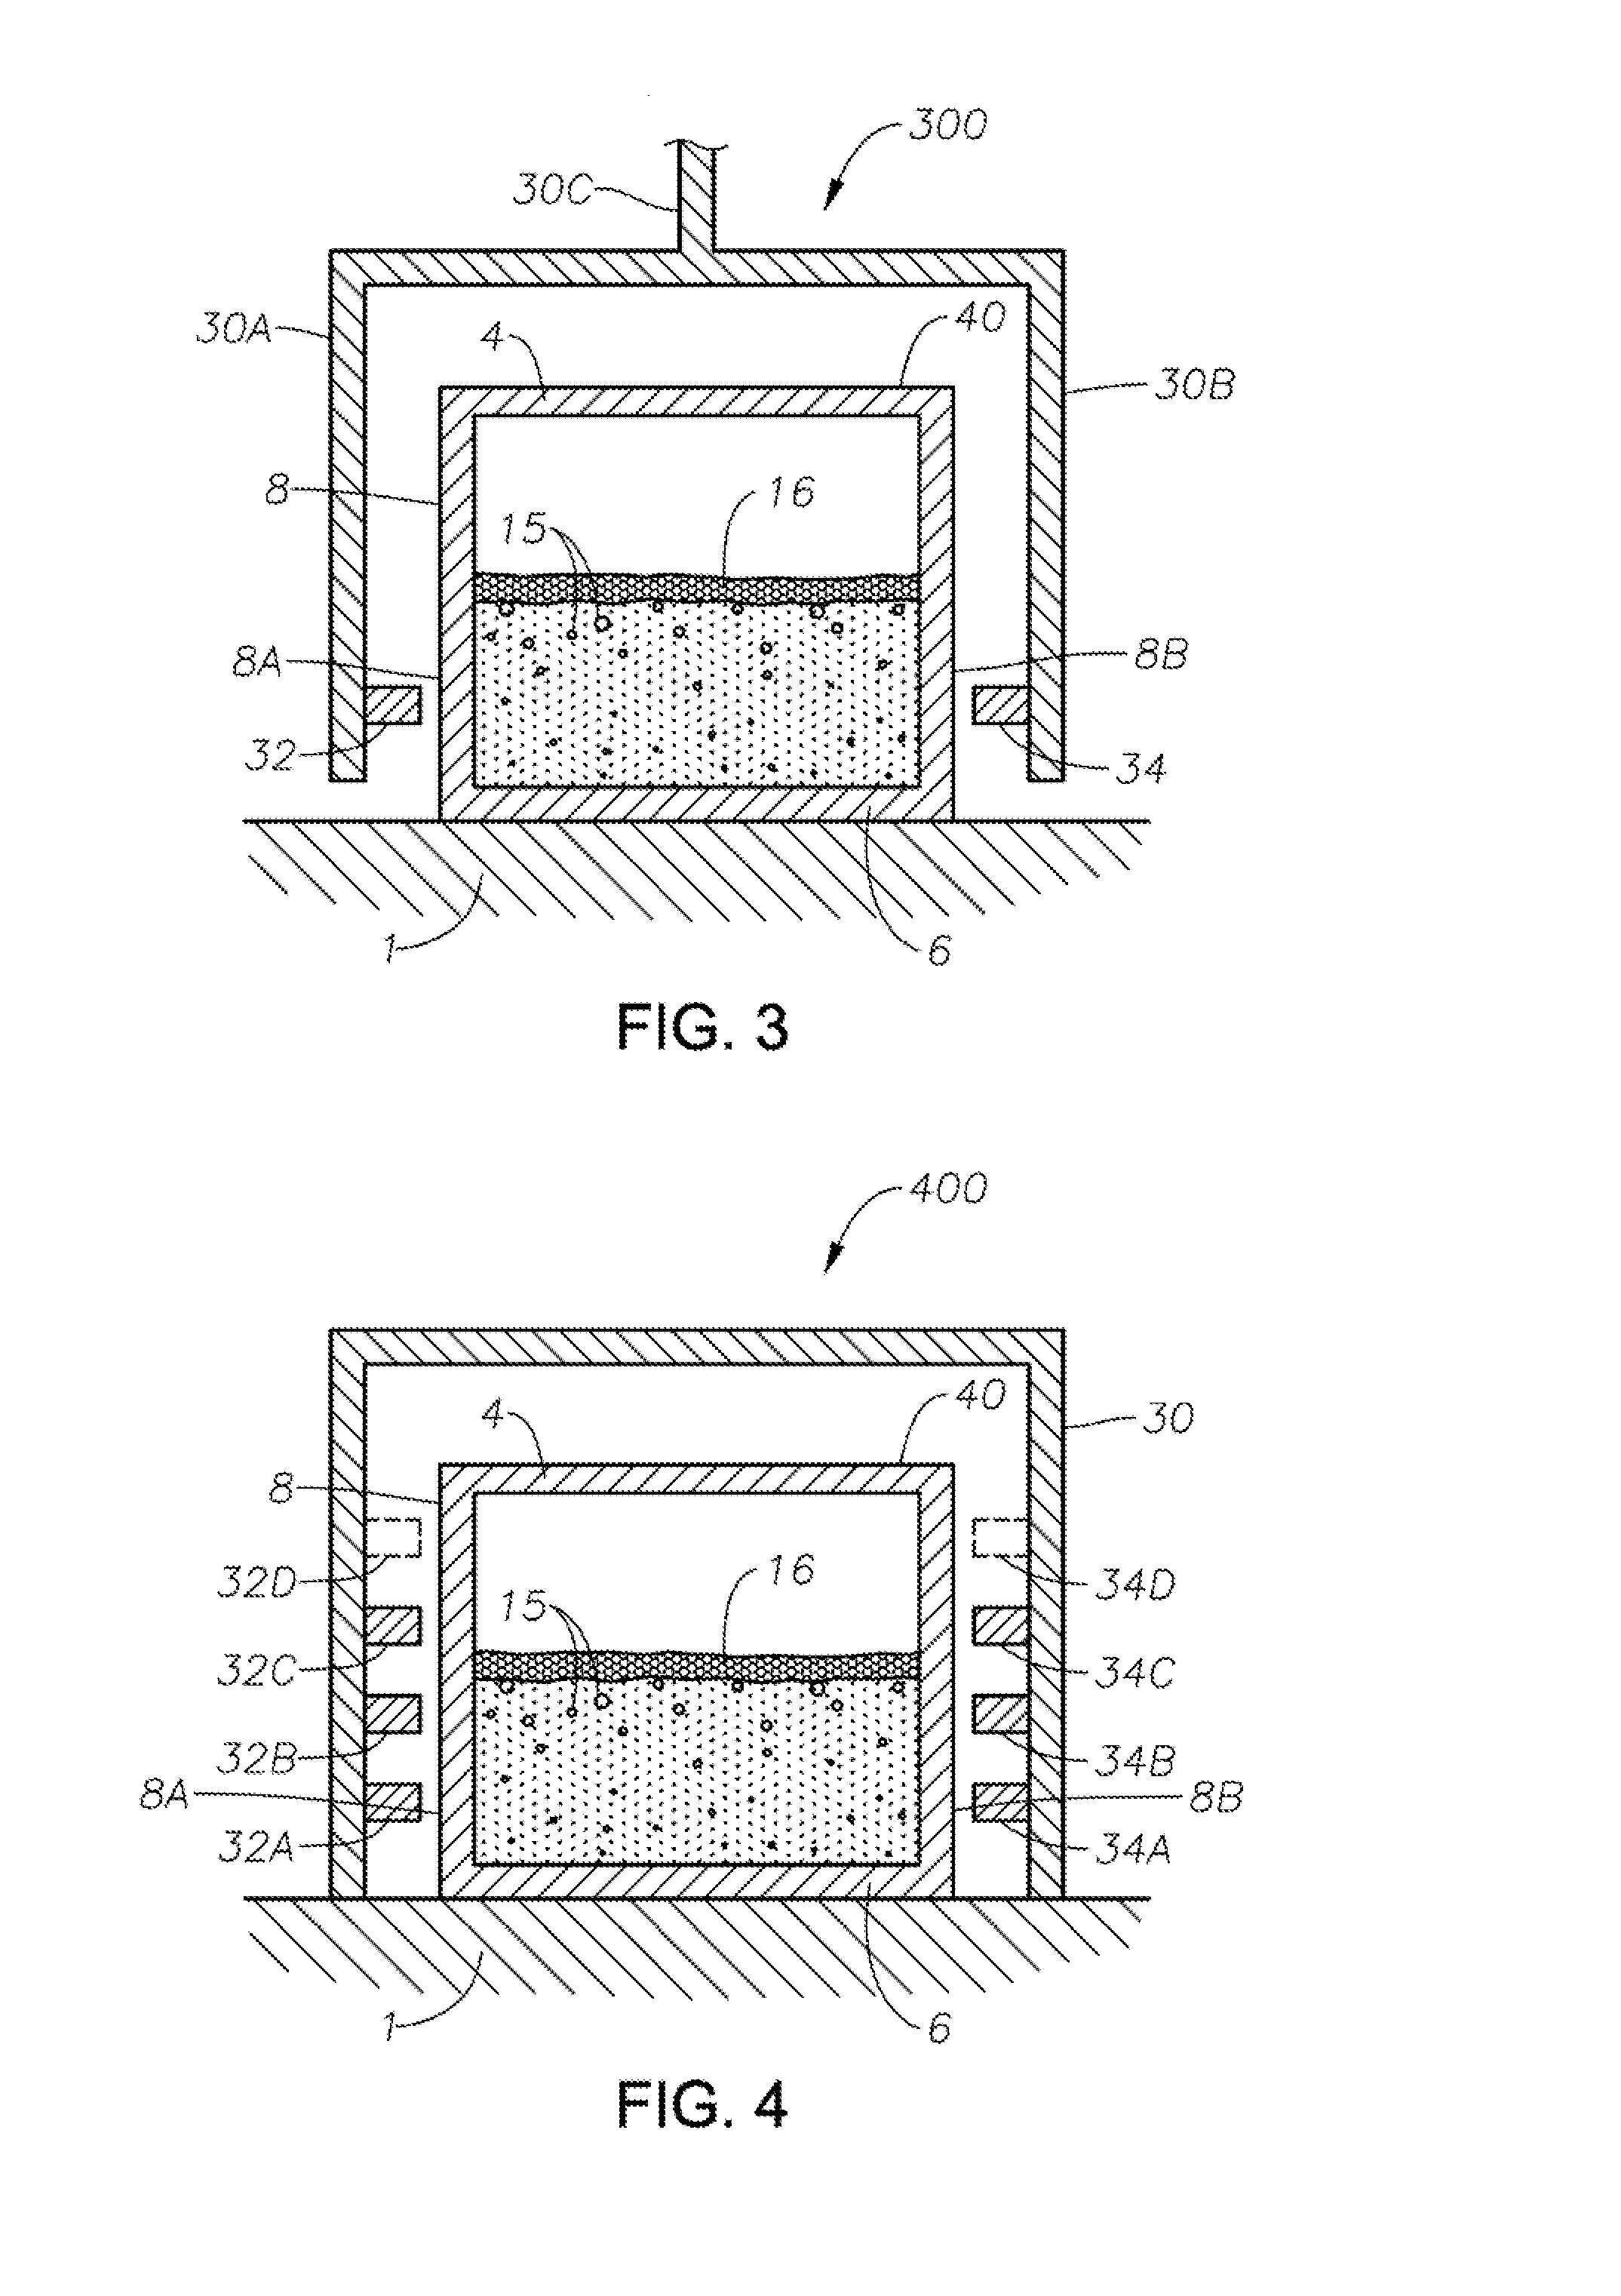 Methods and systems for monitoring glass and/or foam density as a function of vertical position within a vessel